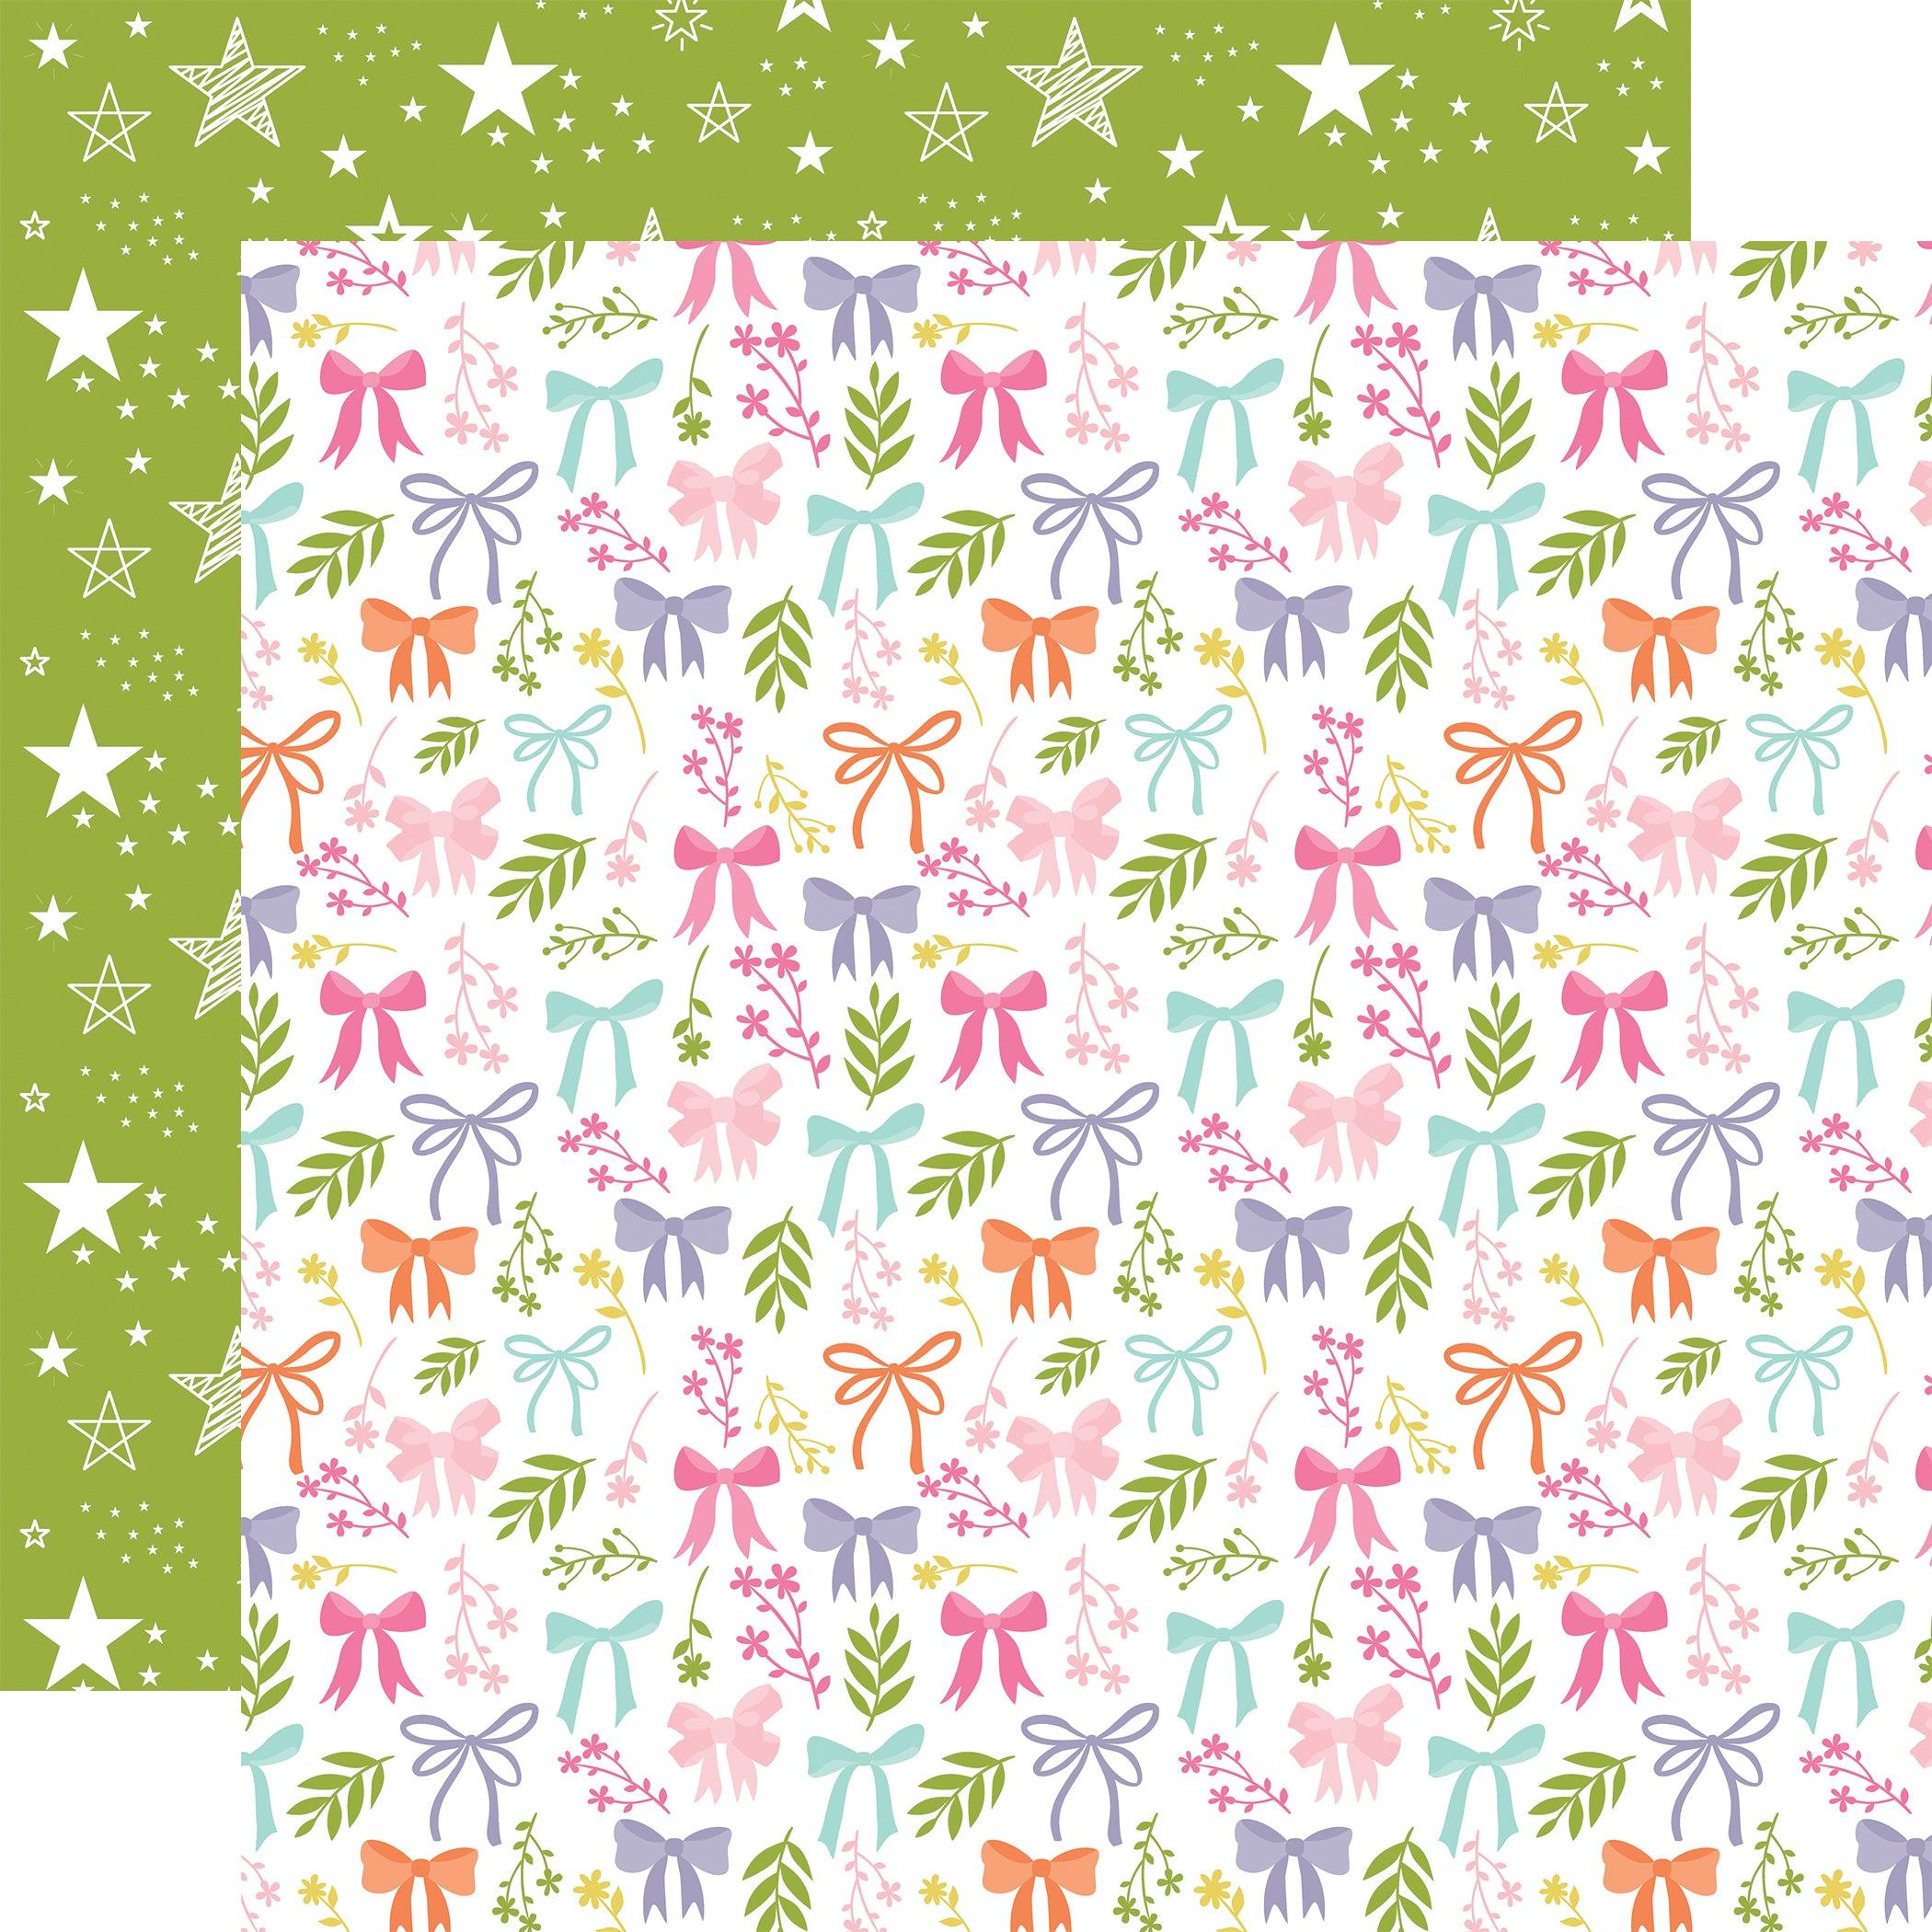 All About A Girl Collection Bows And Stems 12 x 12 Double-Sided Scrapbook Paper by Echo Park Paper - Scrapbook Supply Companies